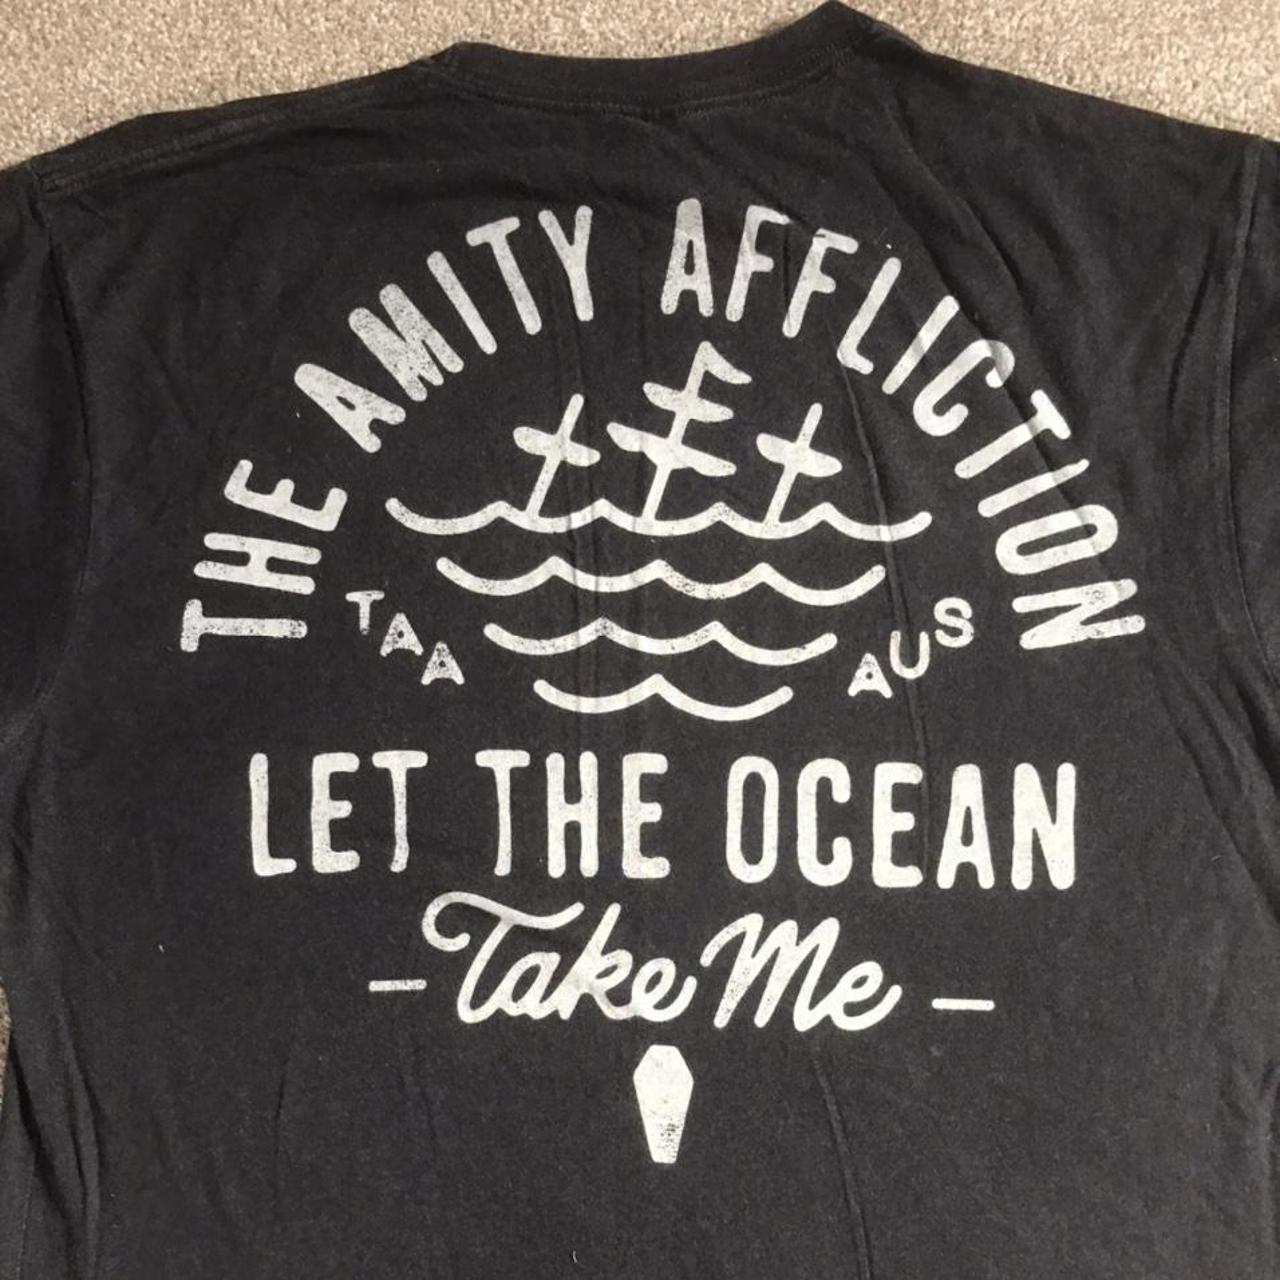 Product Image 1 - Amity affliction t shirt from